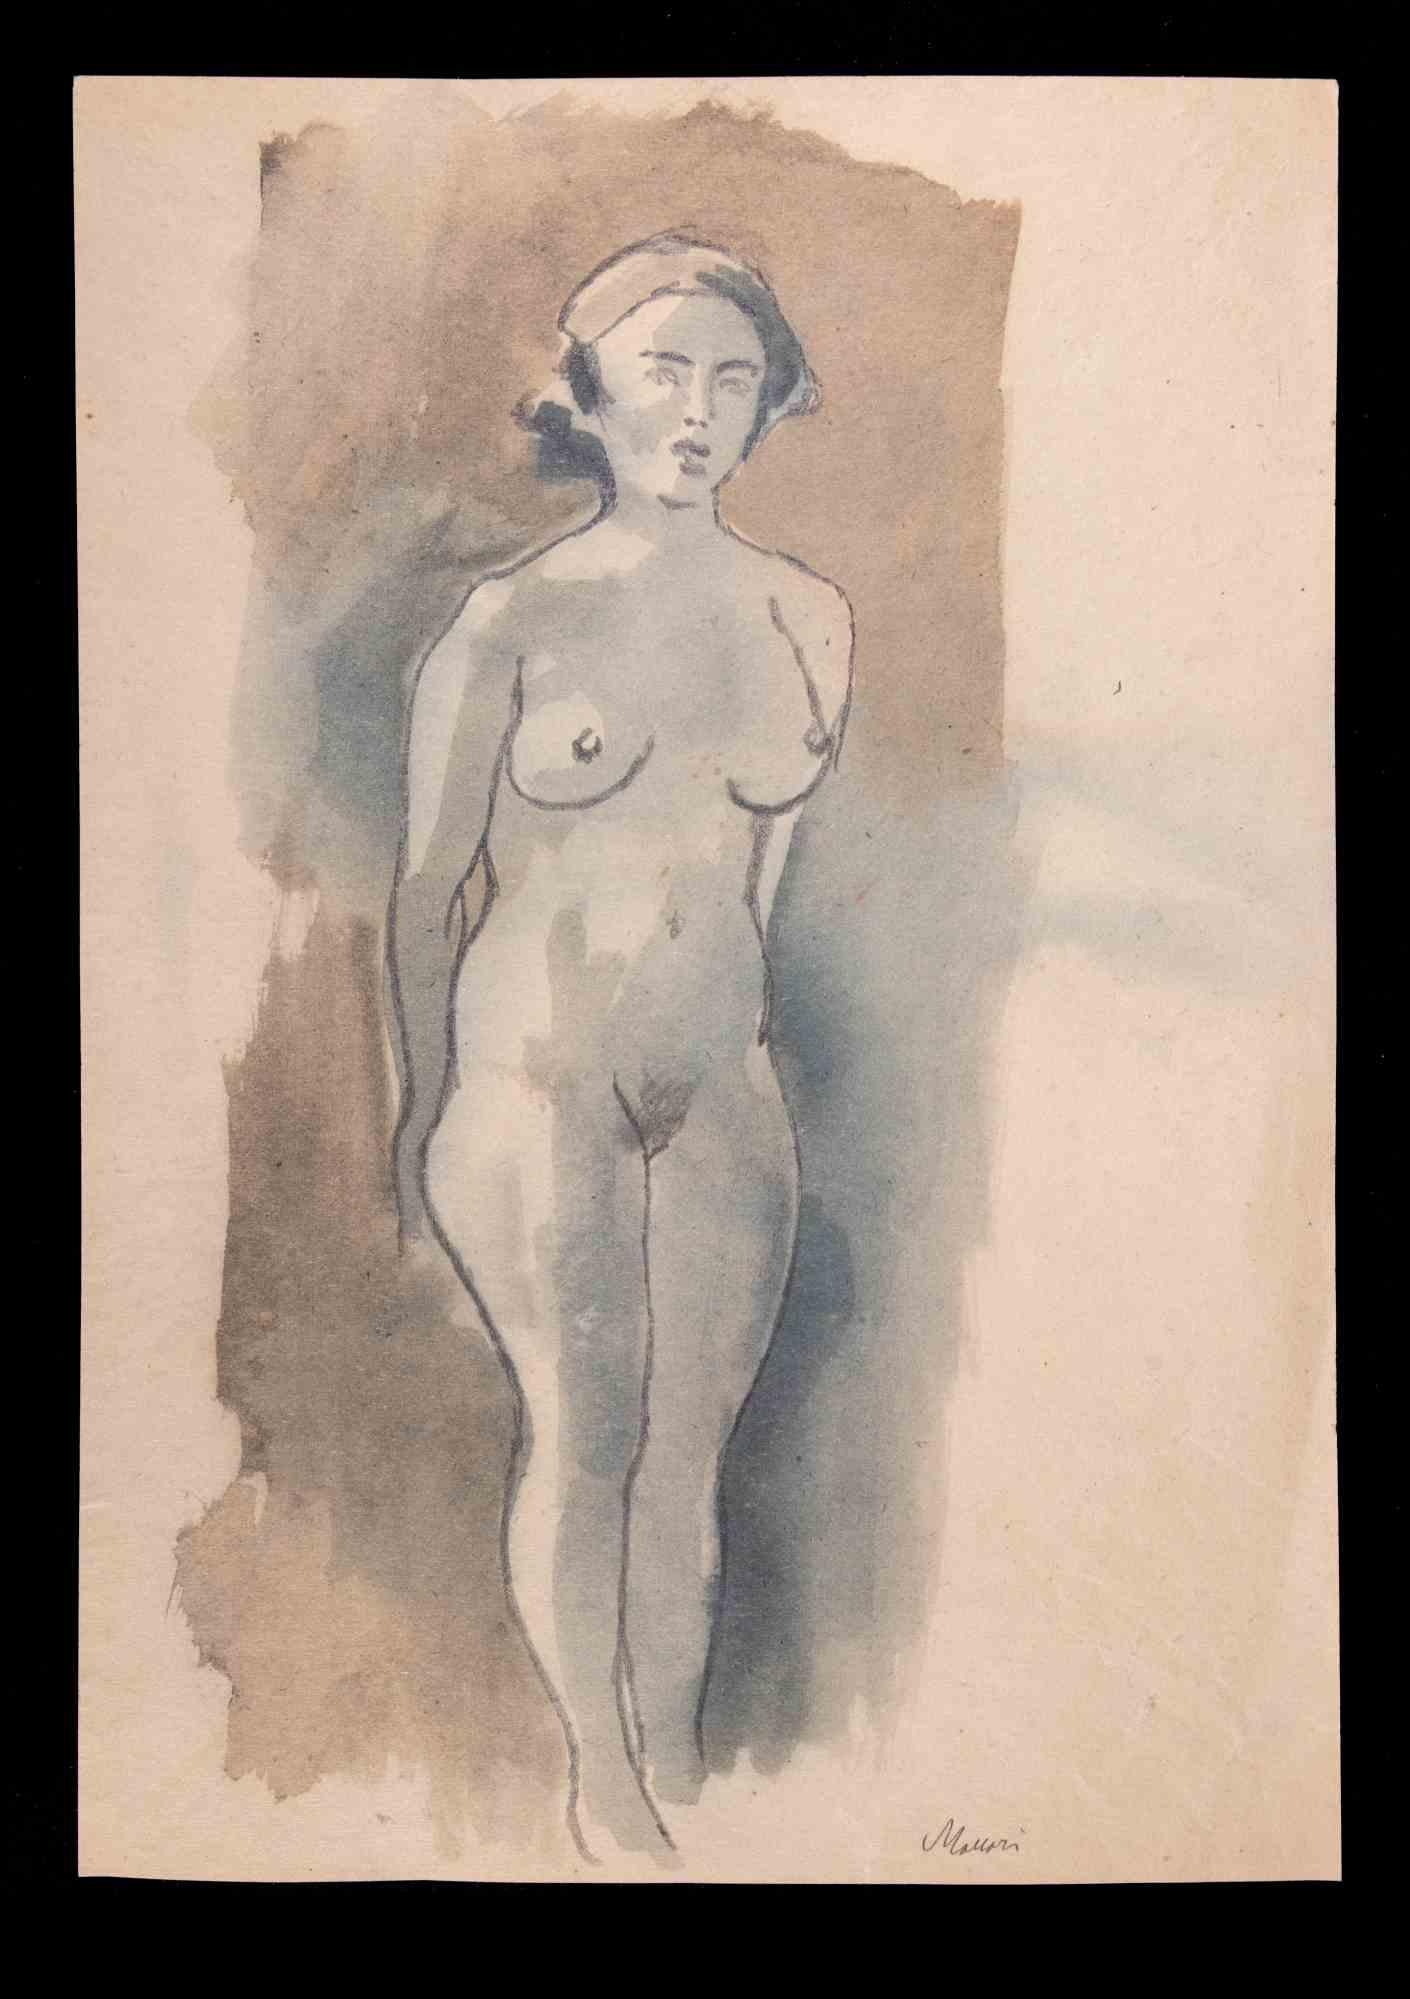 Nude of Woman is a Watercolor Drawing realized by Mino Maccari (1924-1989) in 1930s.

Hand signed on the lower margin.

Good condition on a yellowed paper.

Mino Maccari (Siena, 1924-Rome, June 16, 1989) was an Italian writer, painter, engraver and